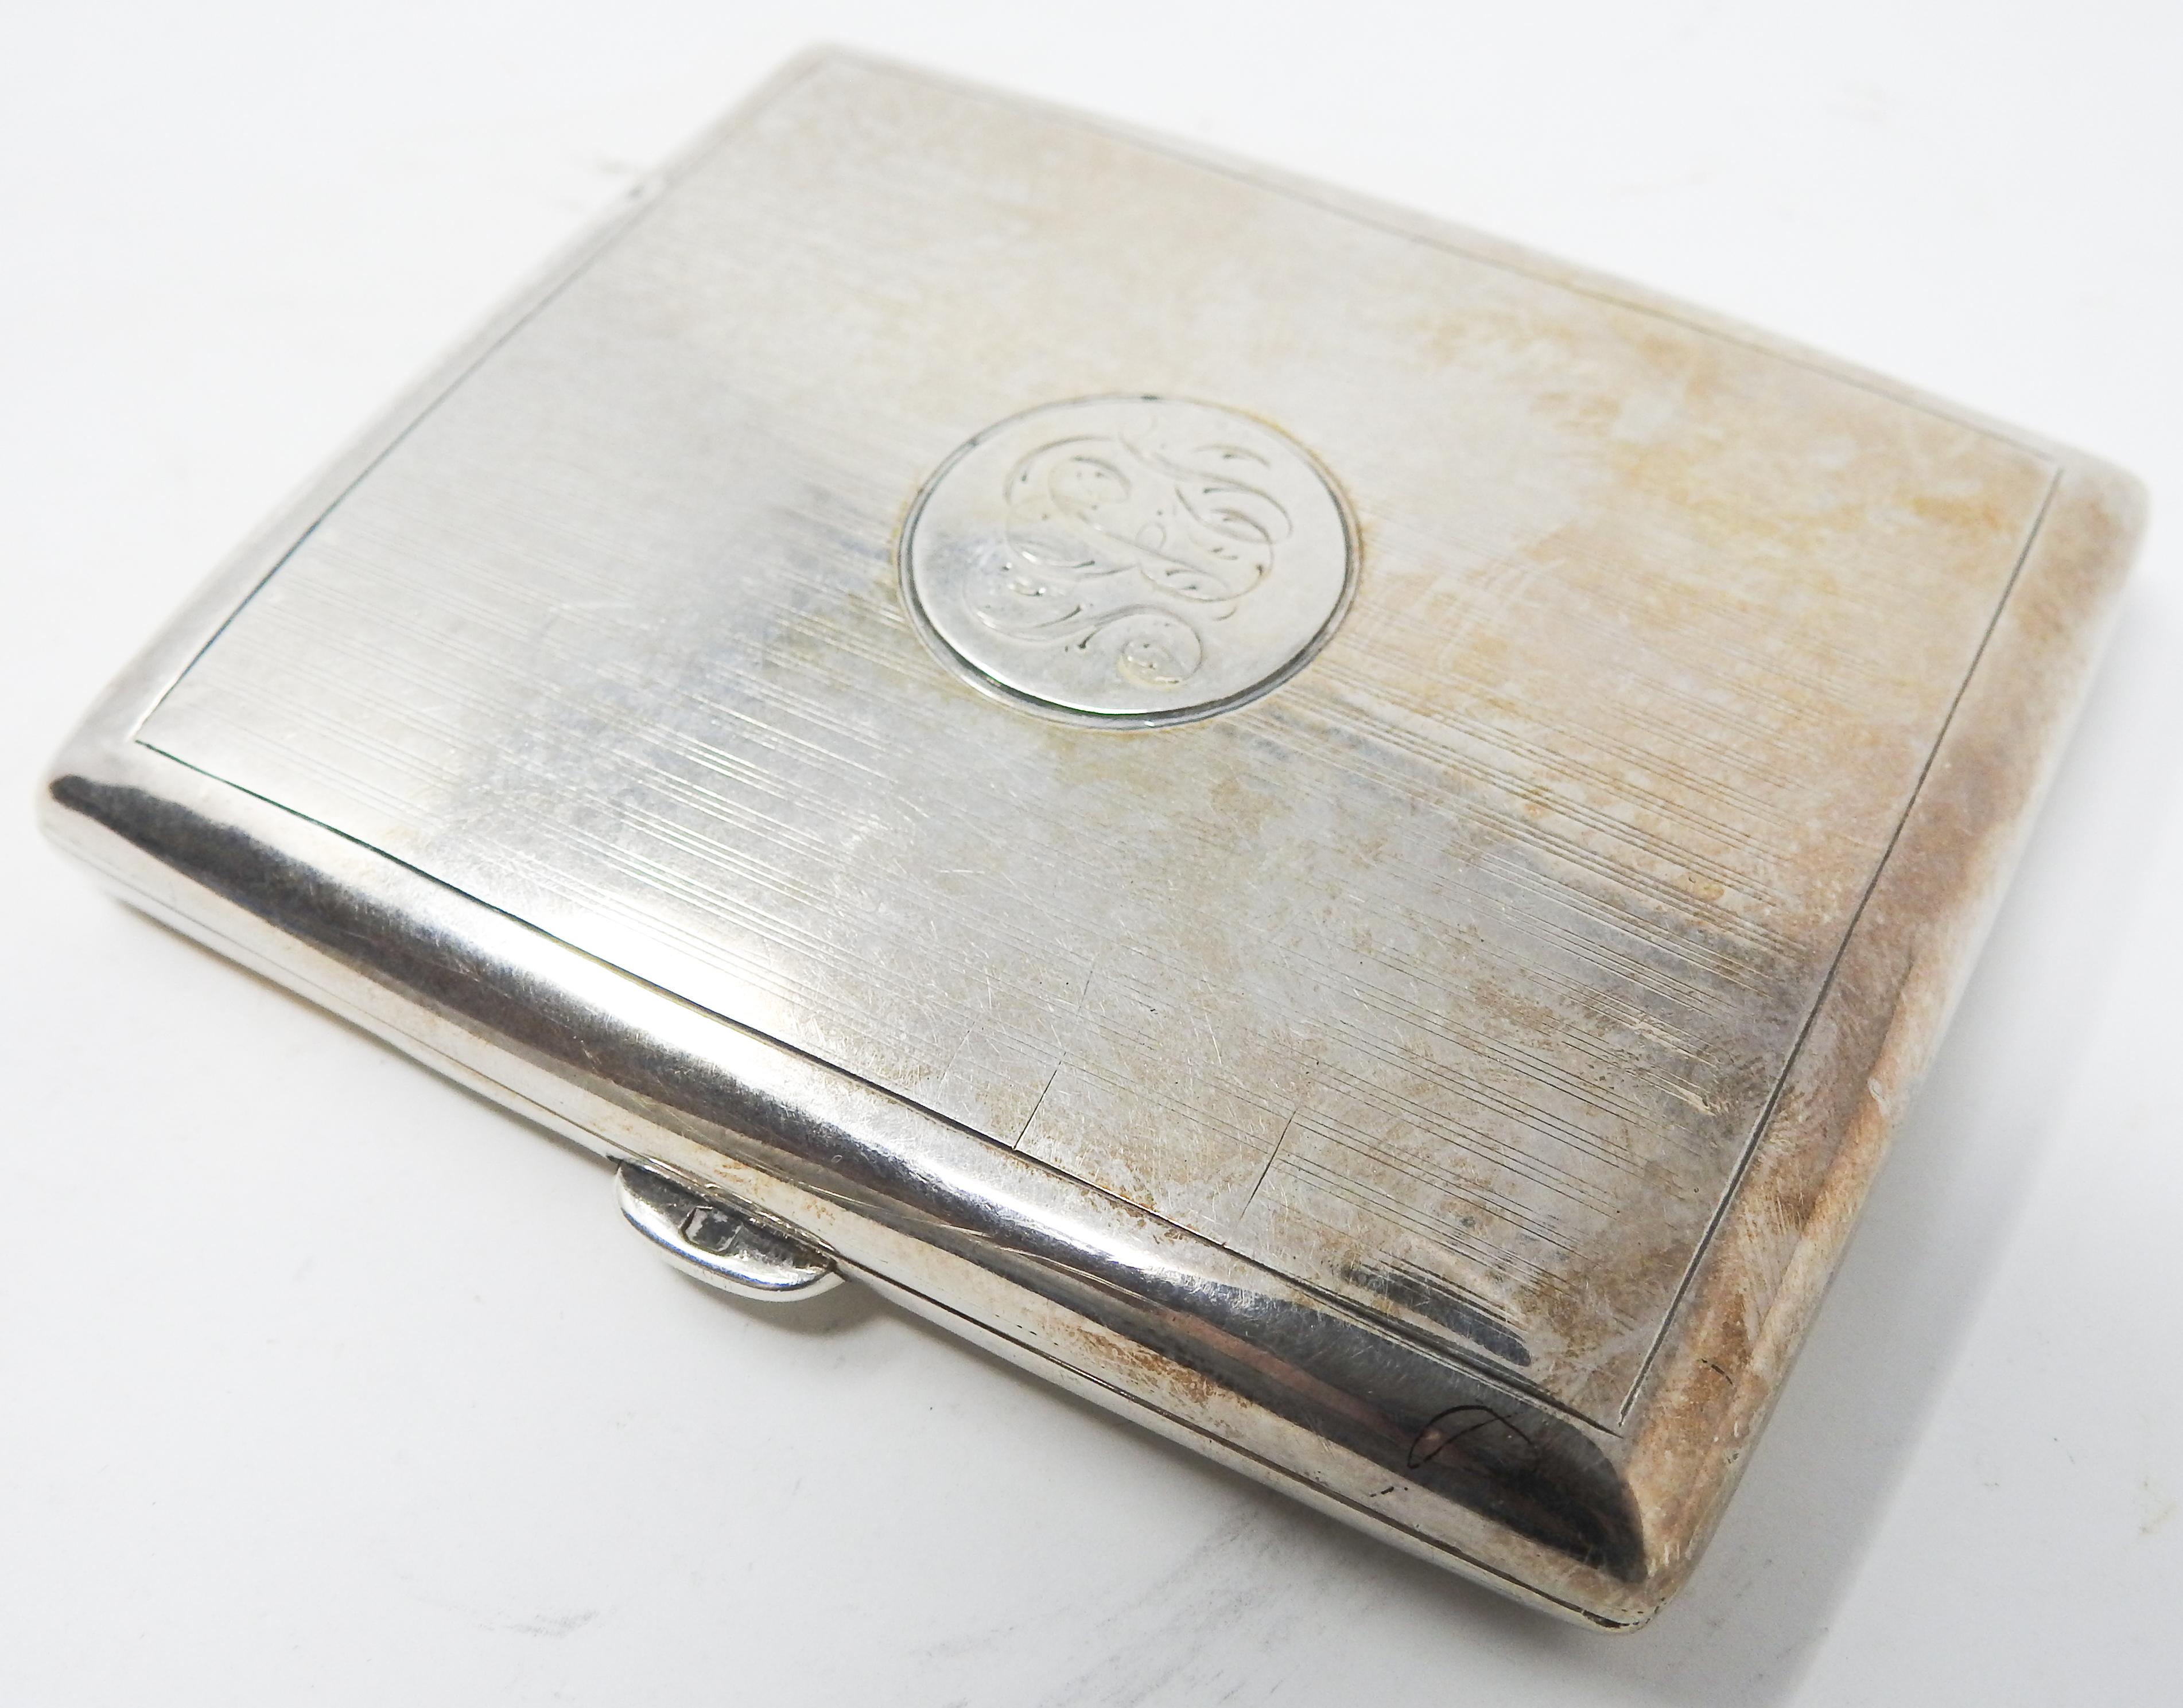 Offering this gorgeous sterling silver cigarette case. The outside of the case is simple with lines and geometric patterns and the initials LBS. The latch is a push button mechanism. When opened the inside is a matte finish. The inside is also